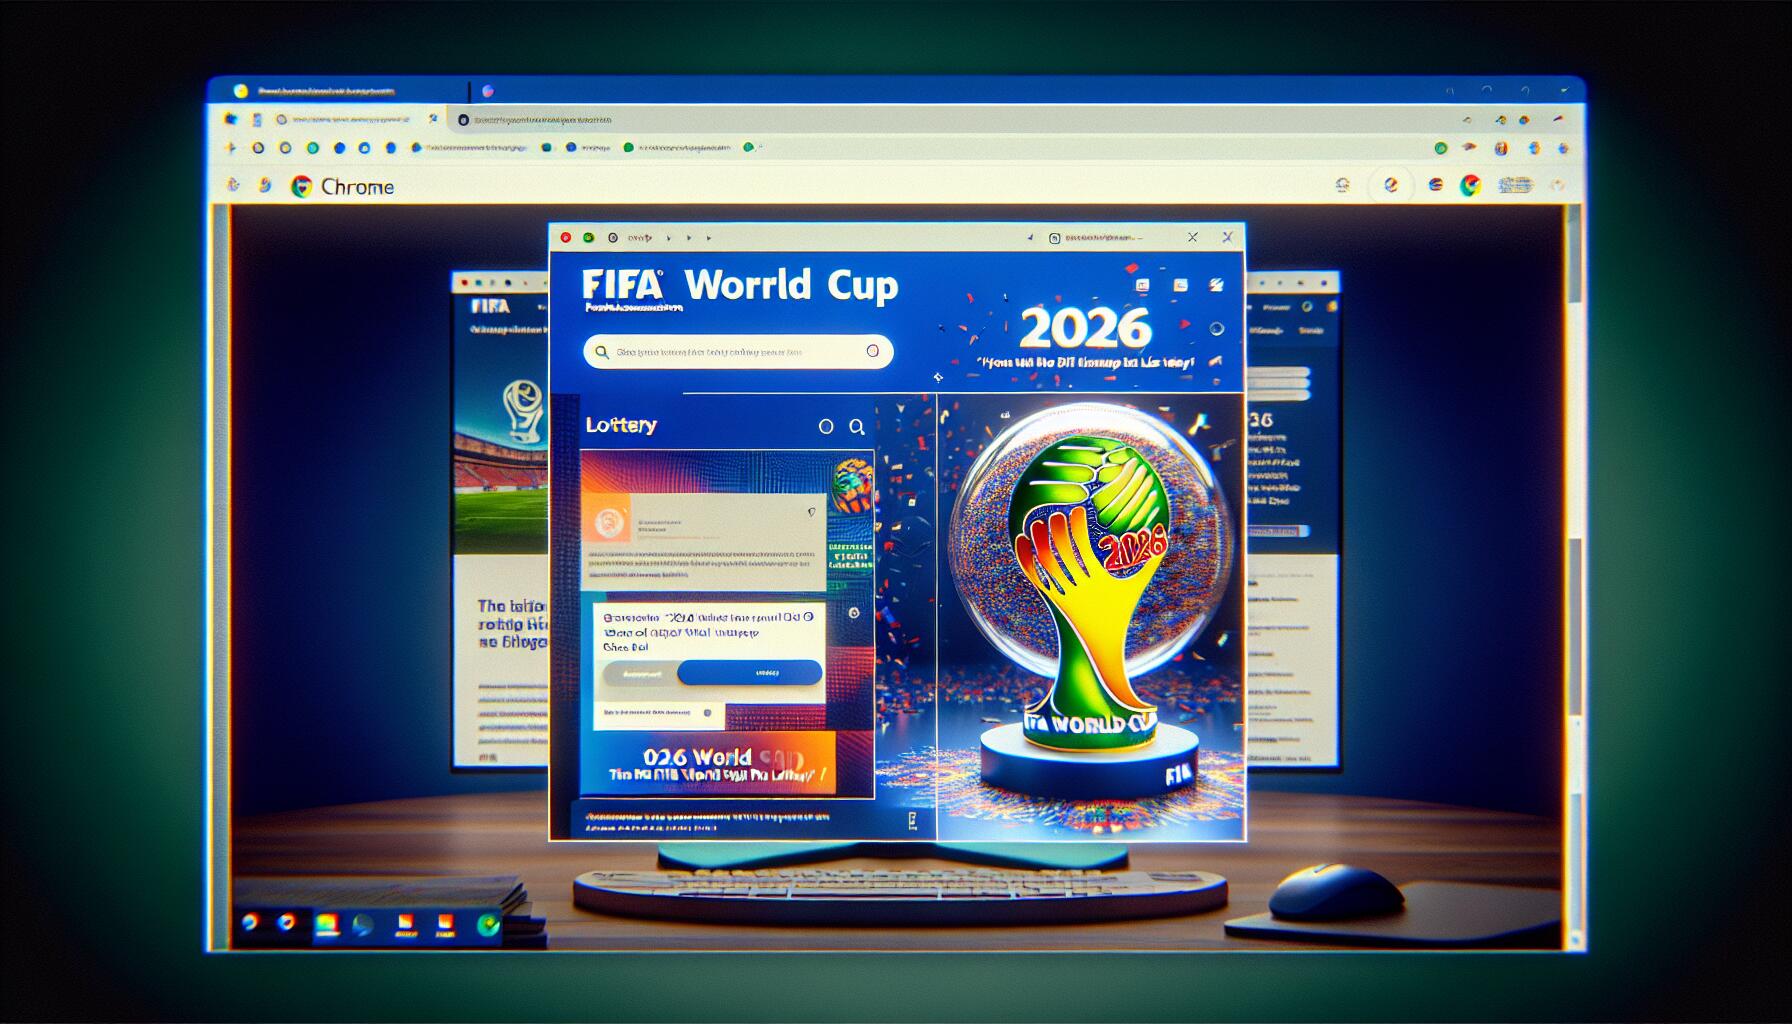 2026 fifa world cup lottery ads